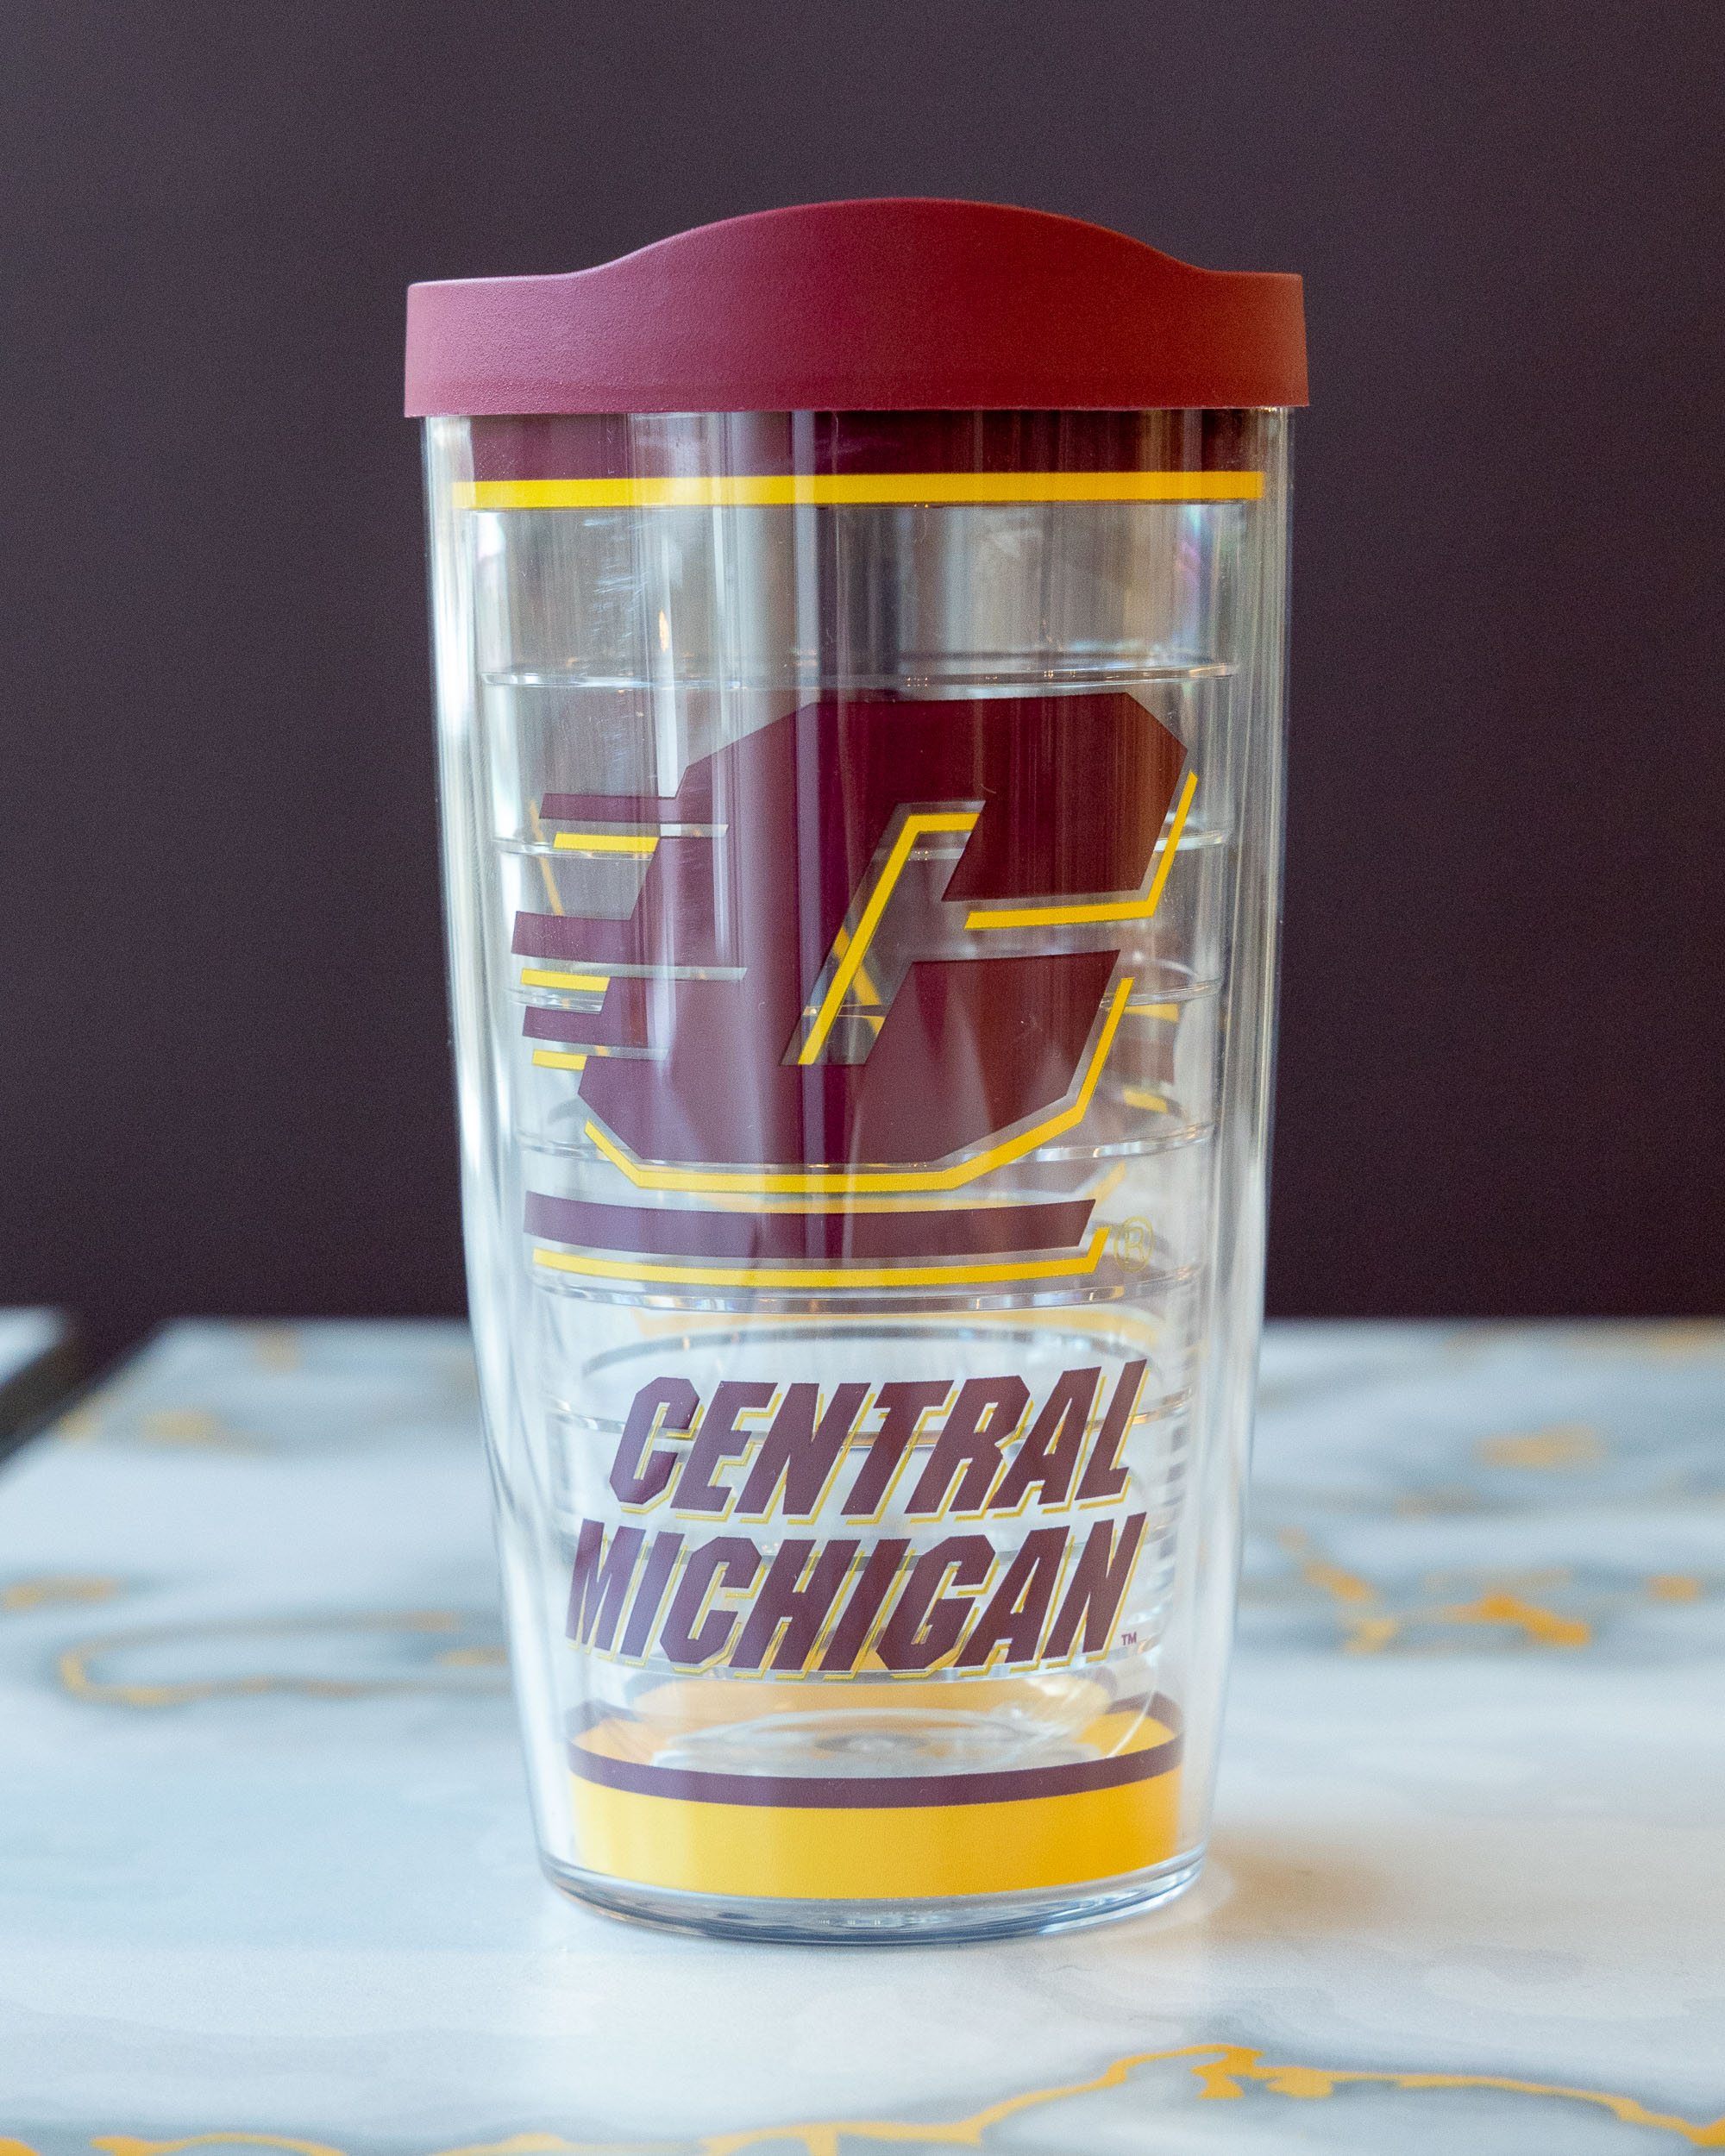 Action C Central Michigan 16 oz. Tumbler with Maroon Lid (SKU 5000127922)